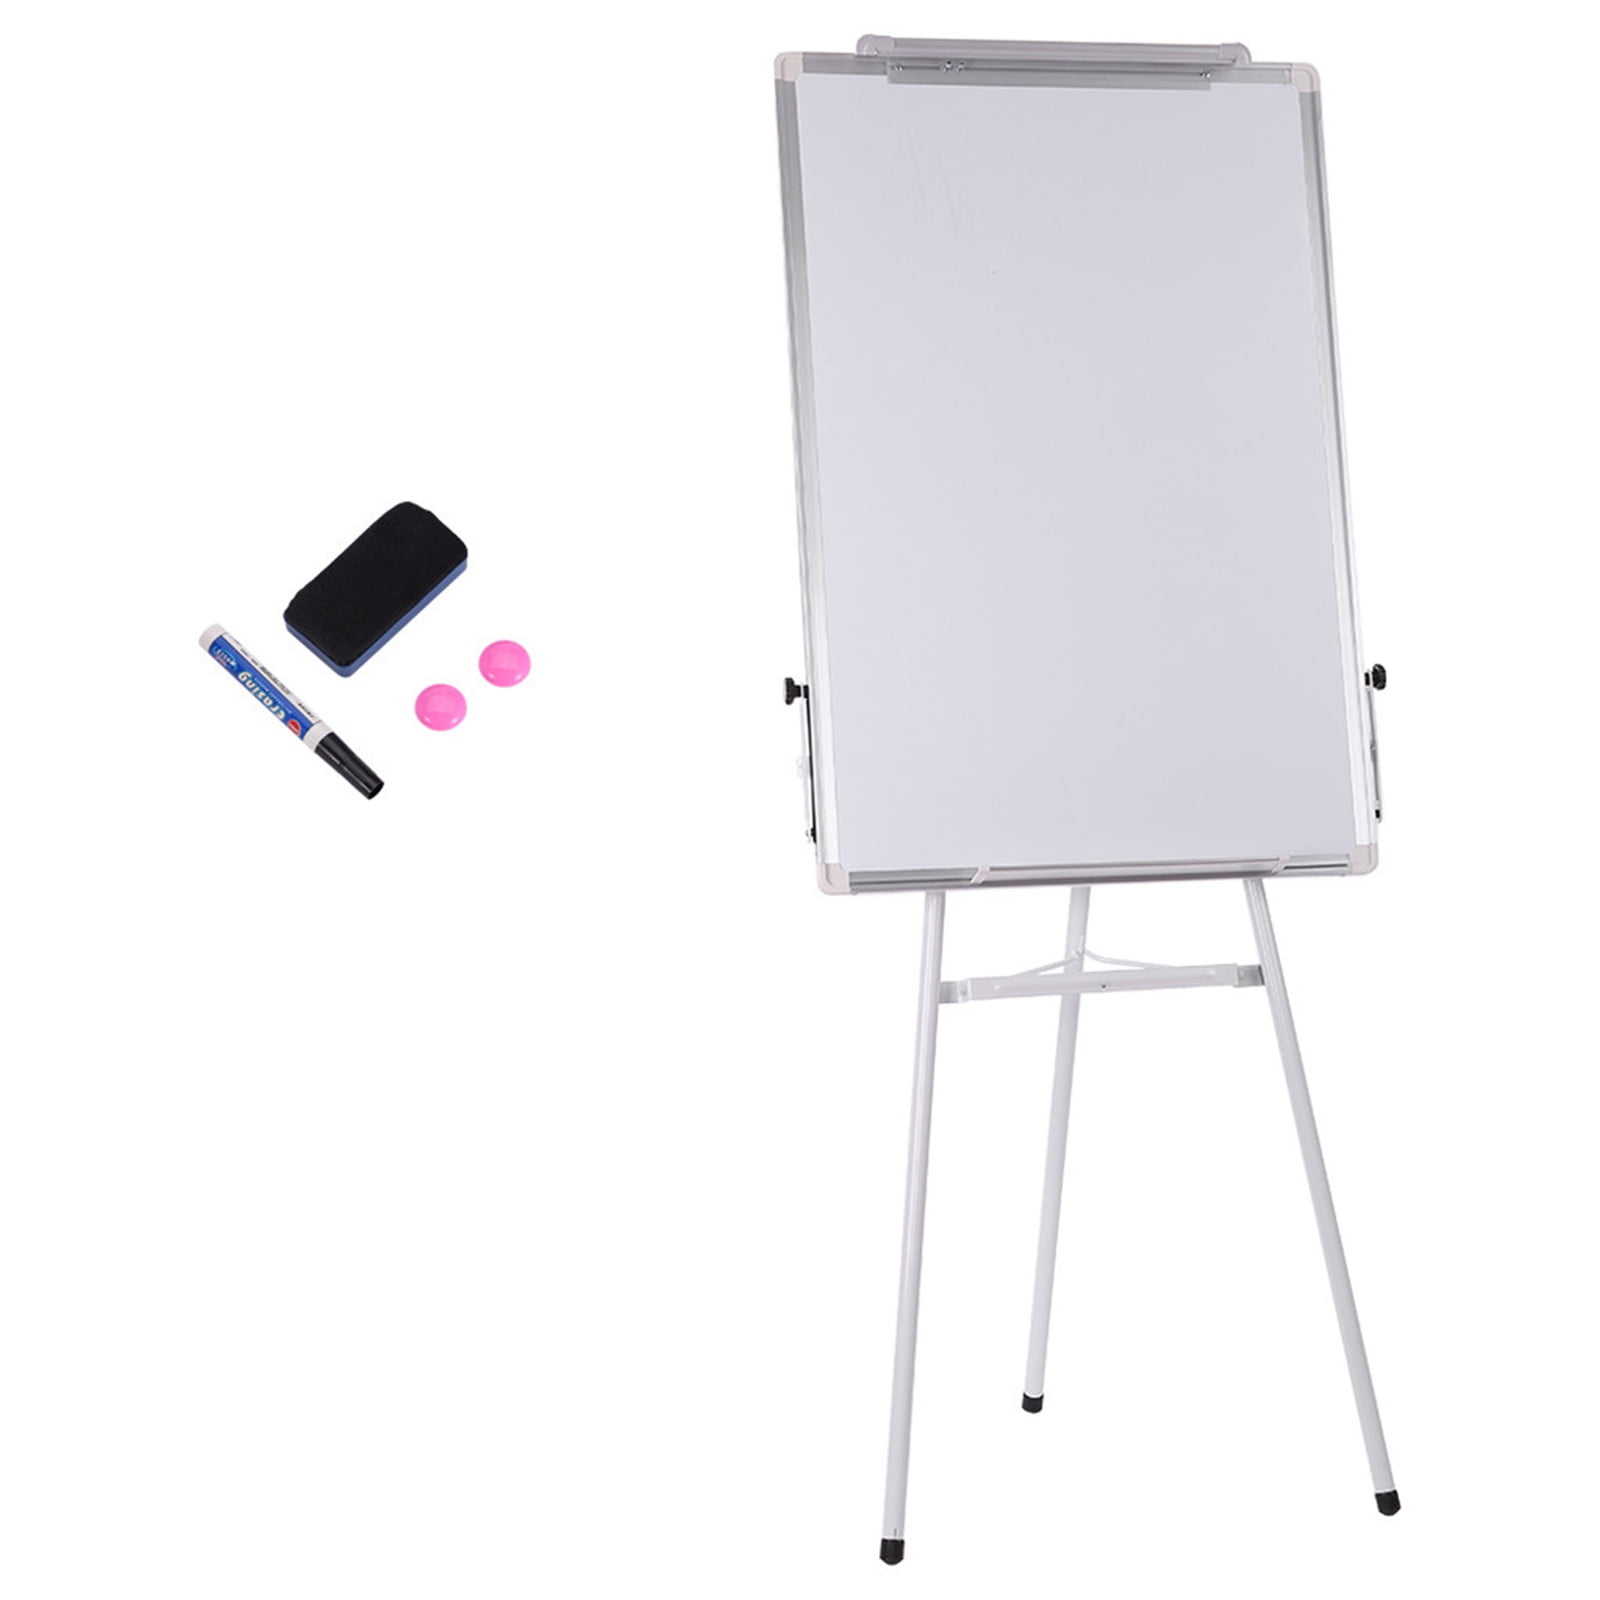 36x24inches Aluminum Alloy Portable White Board,Movable Hooks Adjustable Height Whiteboard Easel Flipchart Stand Magnetic Dry Erase Board 